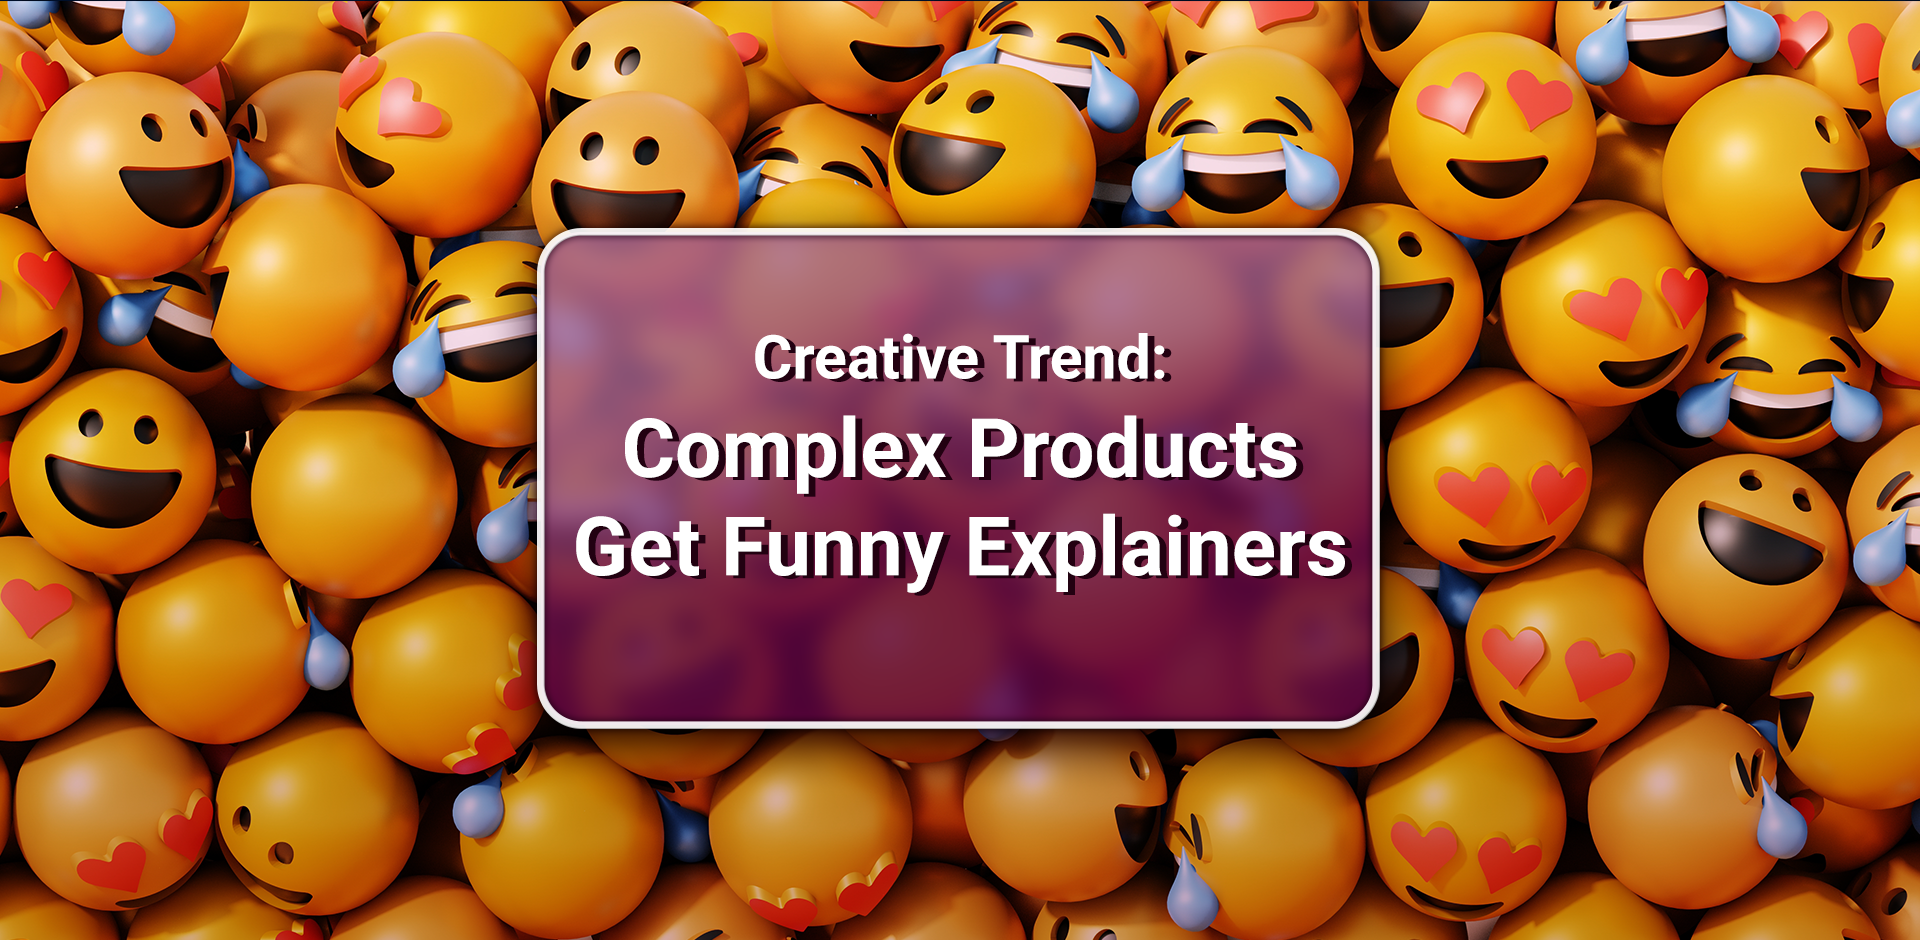 Creative Trends: Complex Products Get Funny Explainers